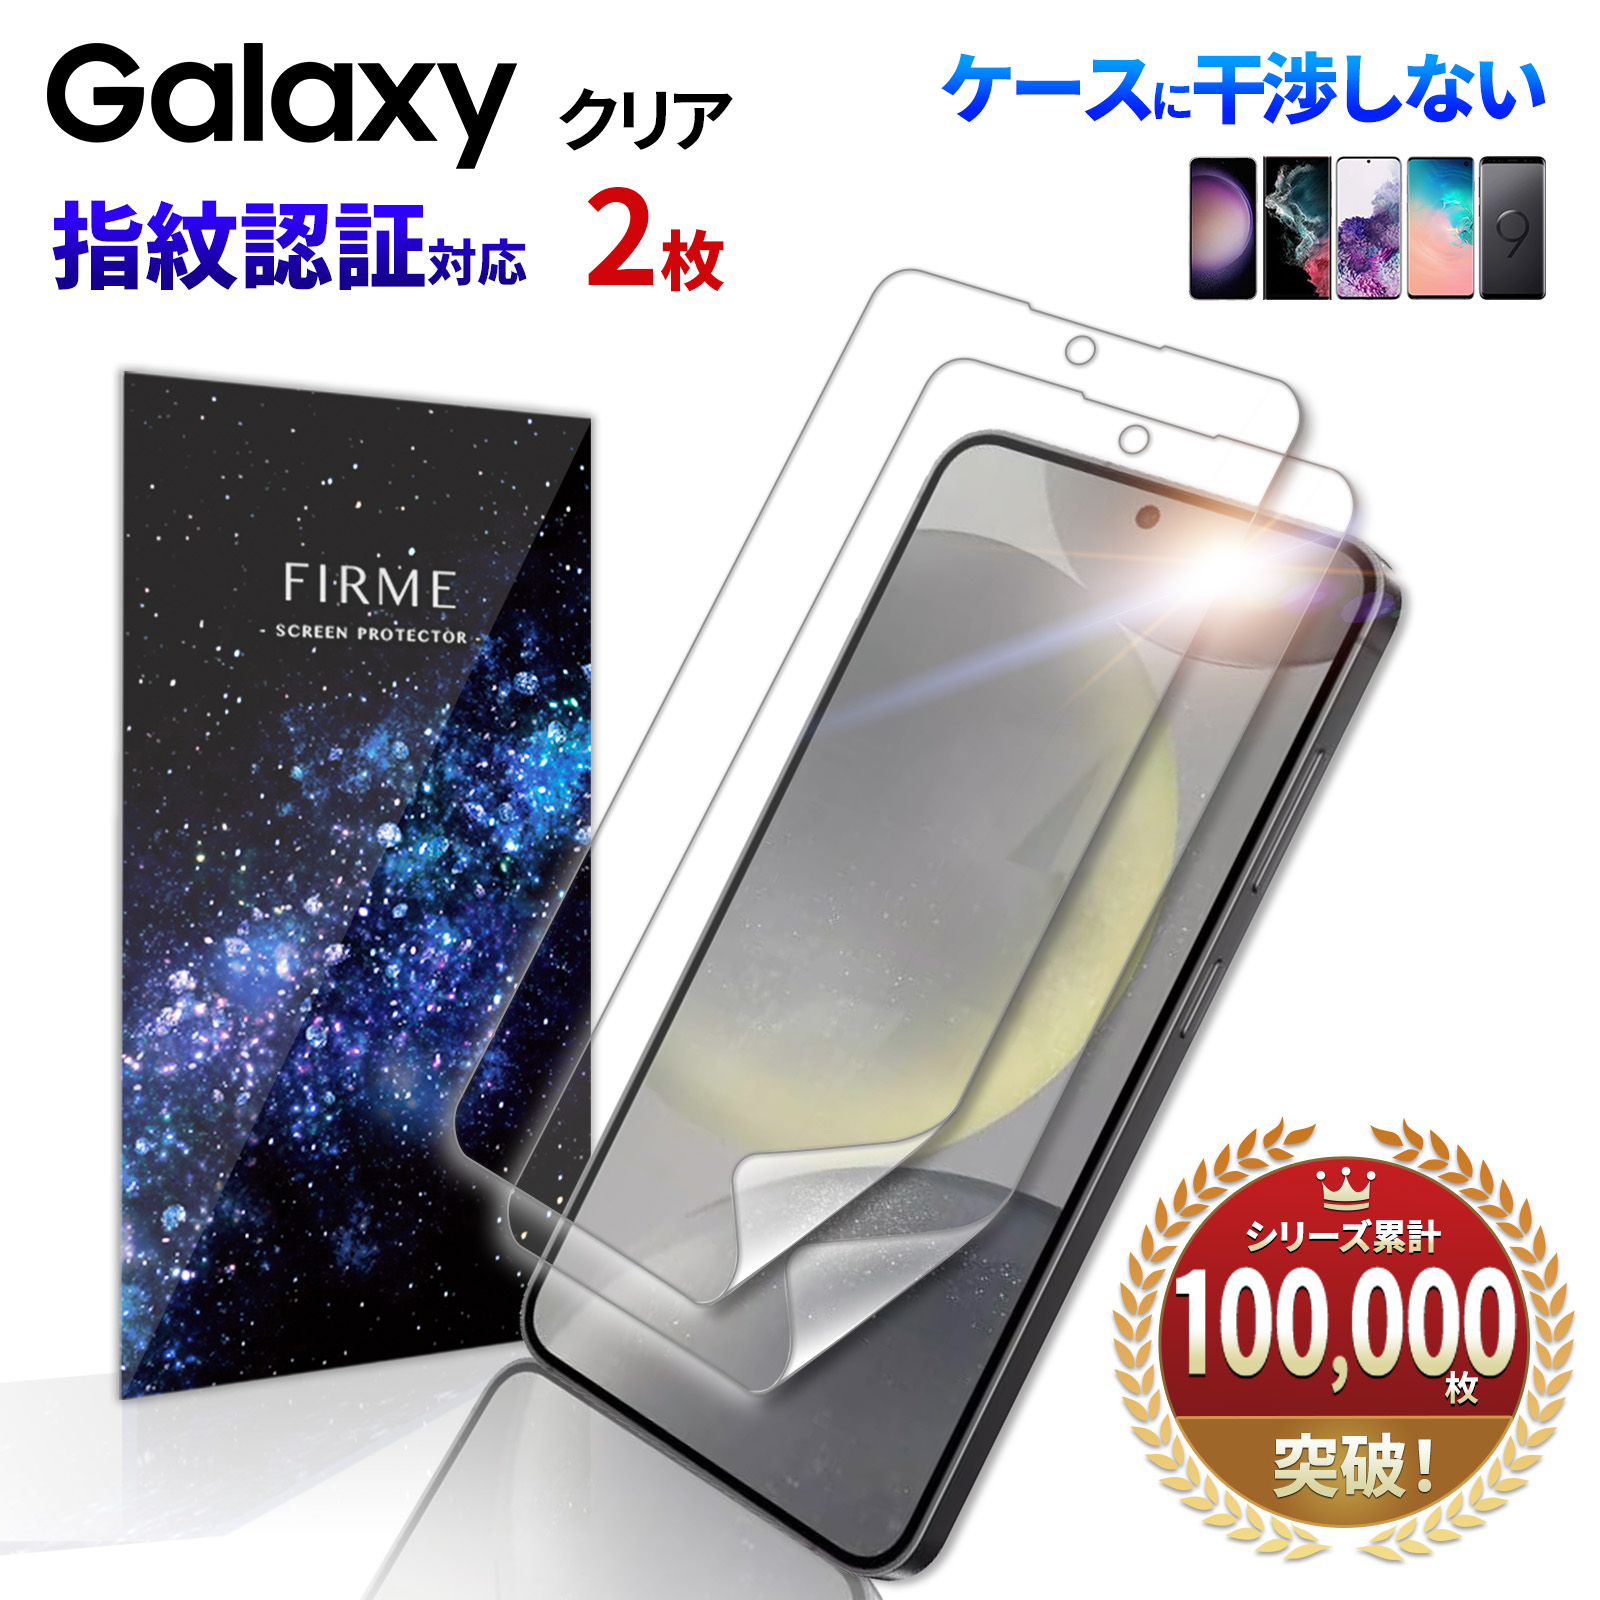 galaxy S24 Ultra フィルム s23 ultra s22 ultra s20 s10 s22 s21 s9 s10 s8 指紋認証 保護 note10 + sc03l 5g 衝撃吸収 透明 クリア ウレタン